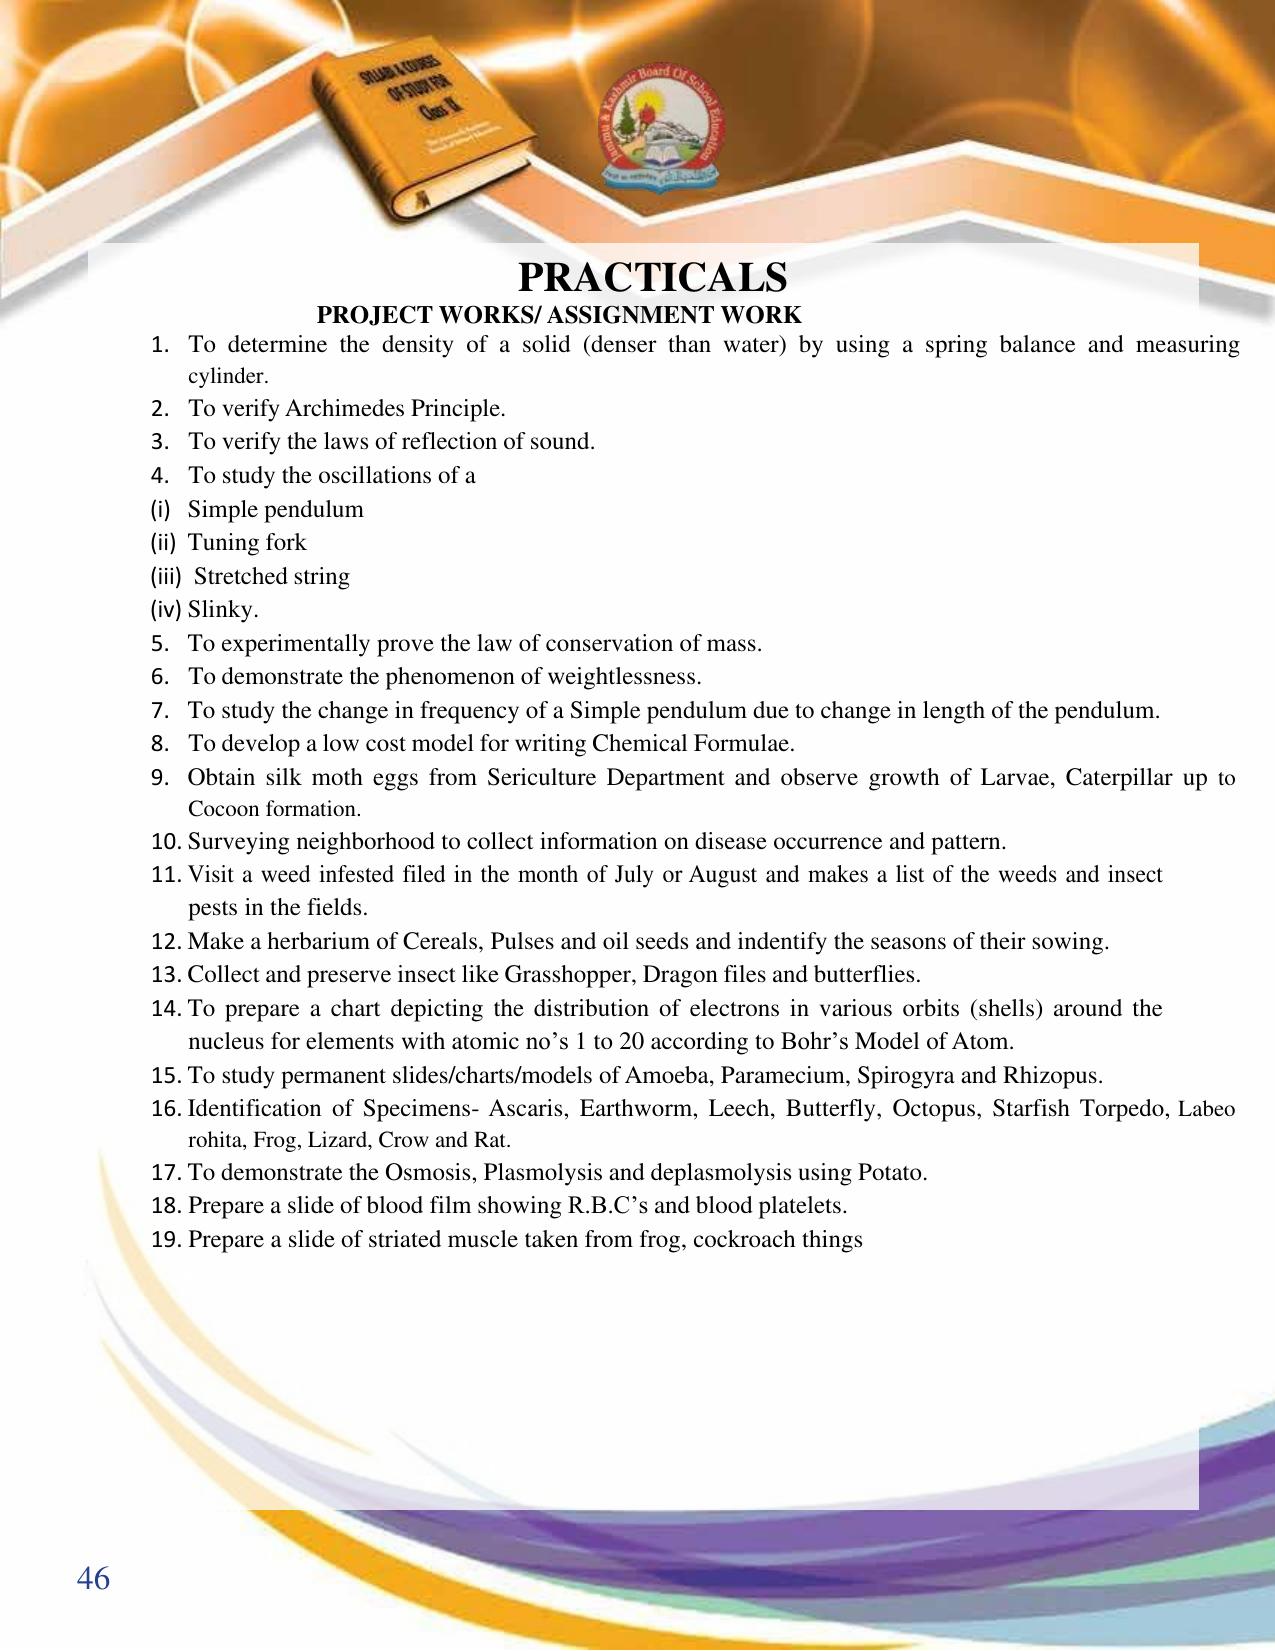 JKBOSE Syllabus for 9th class - Page 47